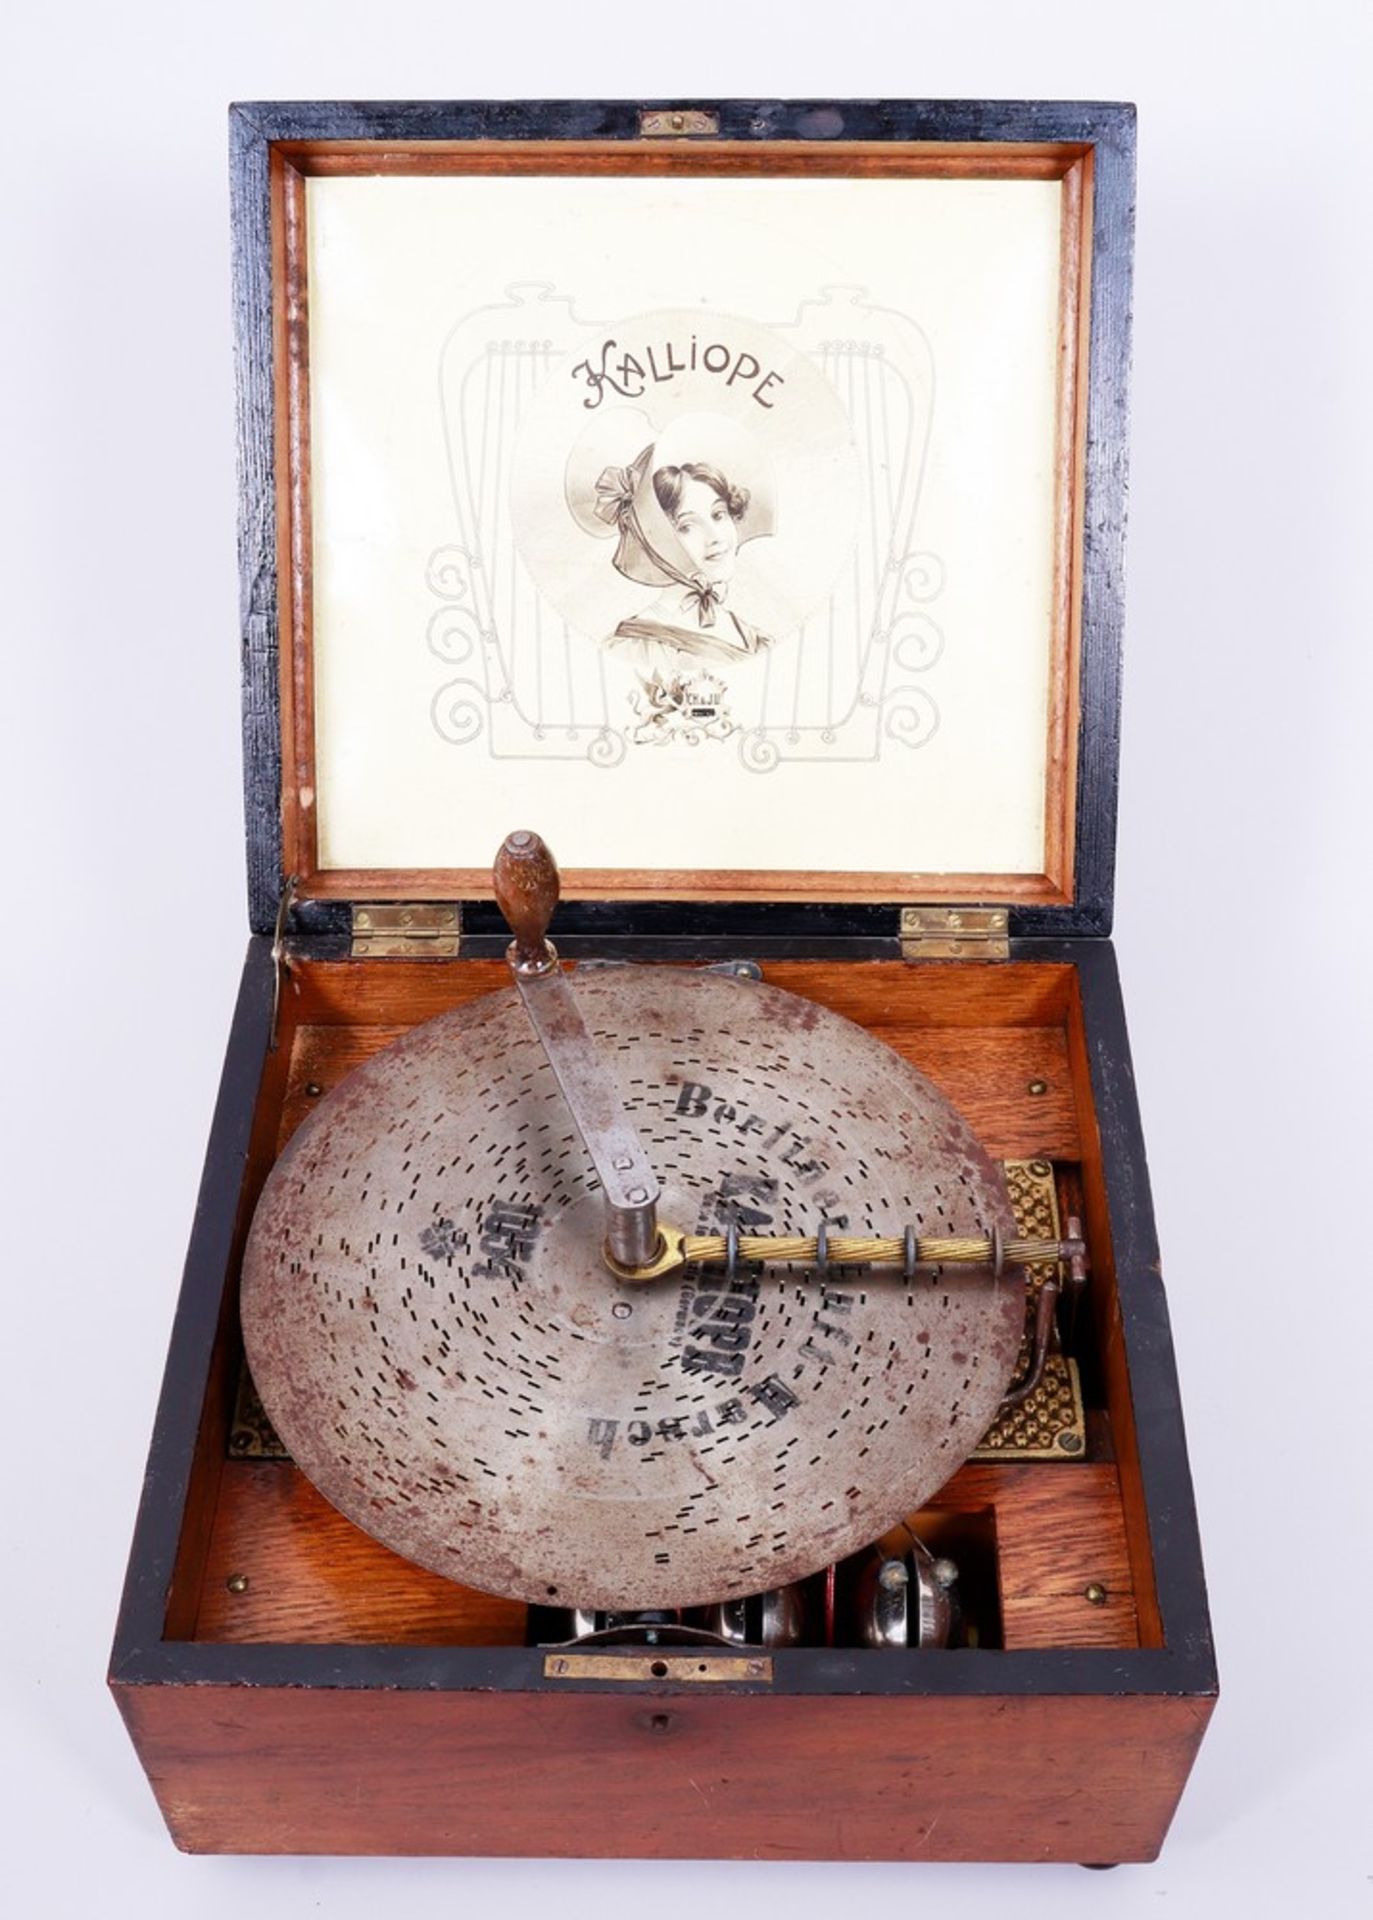 Music box with glockenspiel and perforated plates, Kalliope, Leipzig, c. 1900 - Image 2 of 5